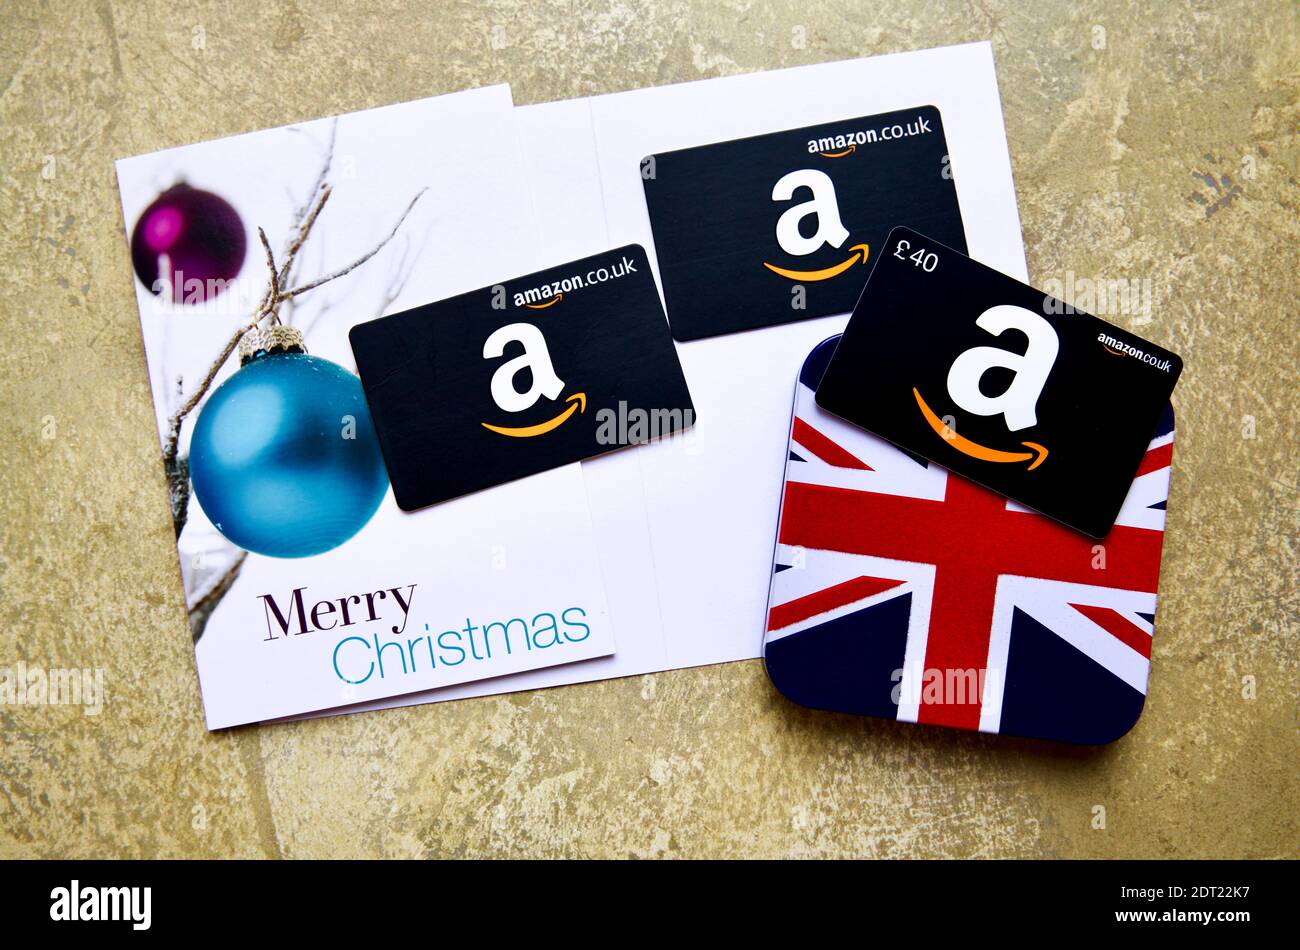 Page 2 - Shopping Voucher High Resolution Stock Photography and Images -  Alamy